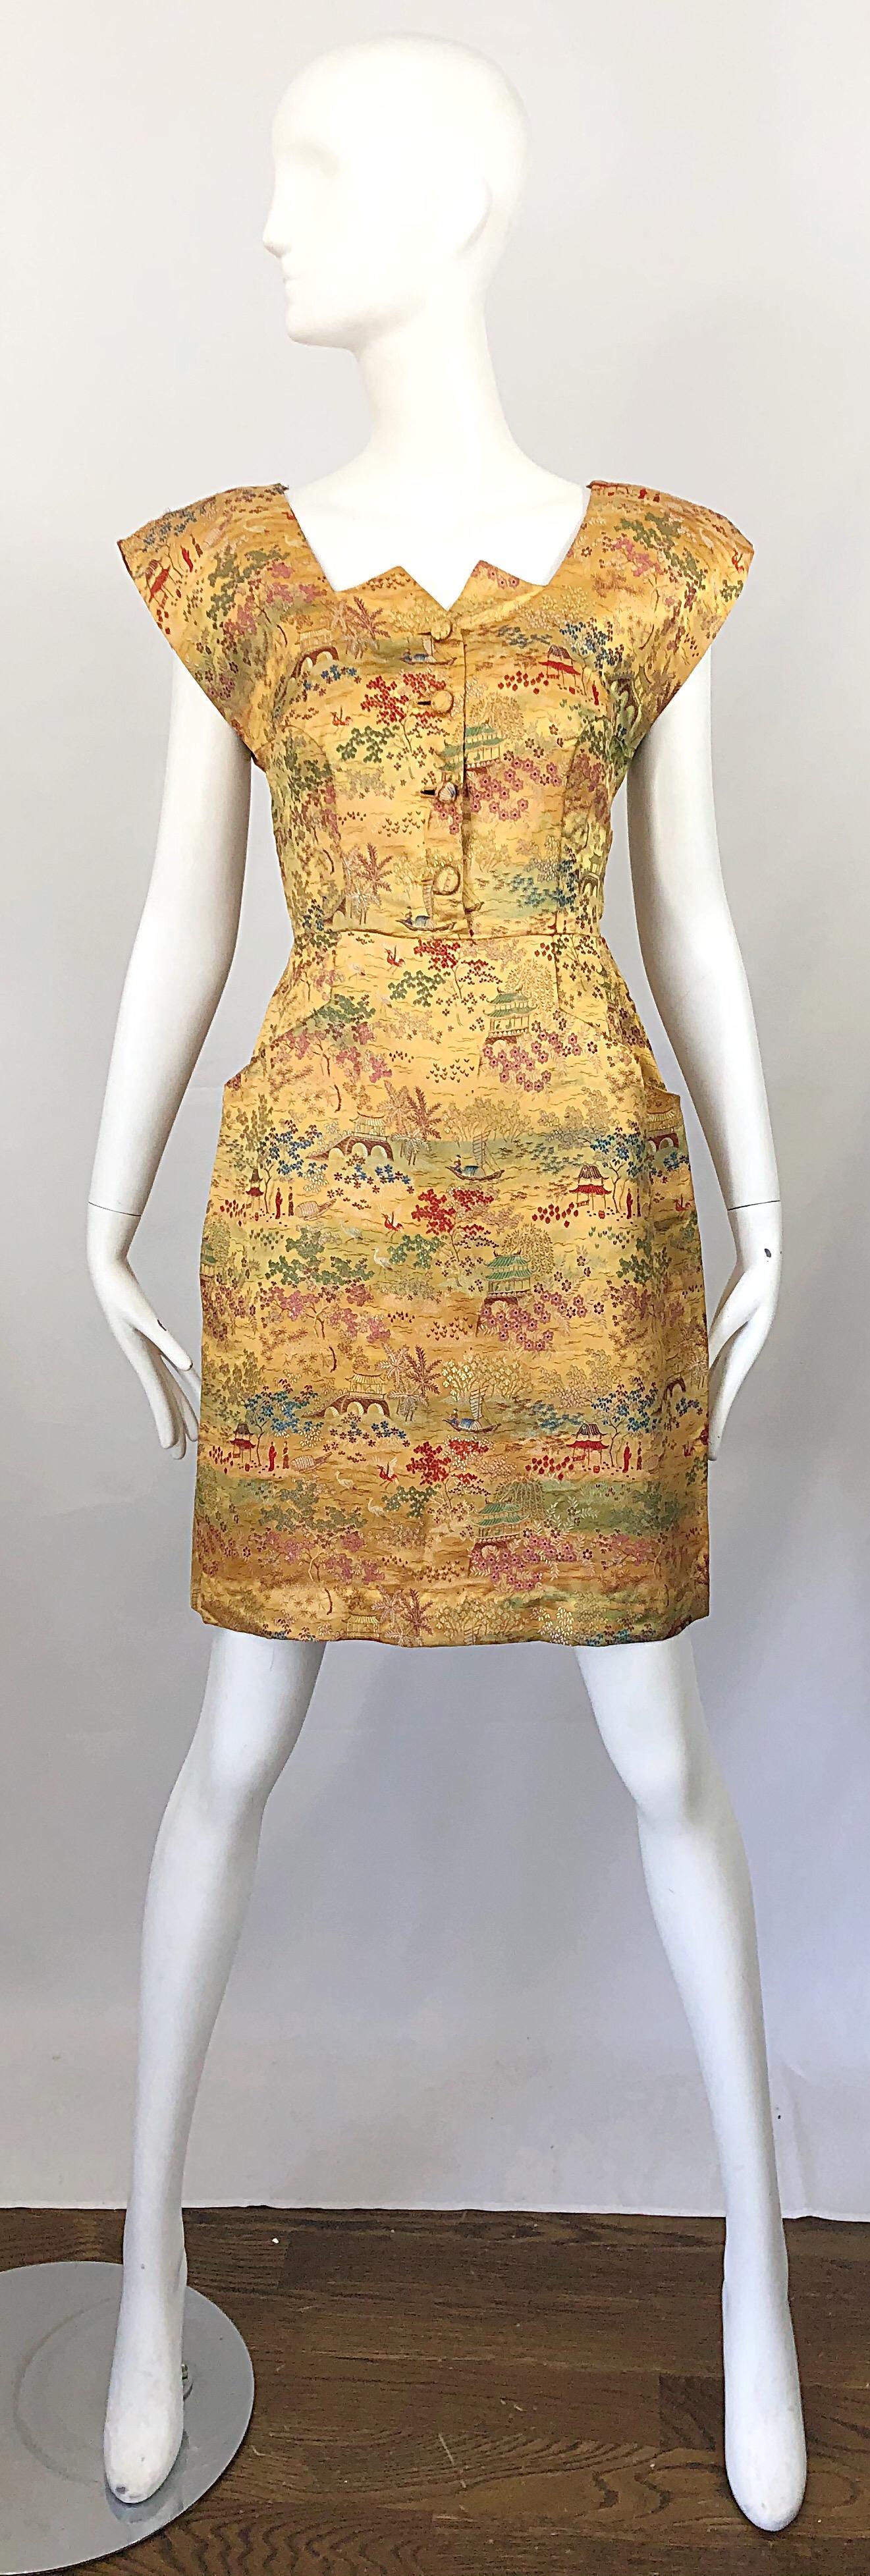 Rare vintage mid 40s novelty Asian print strong shoulder silk dress! Features a warm marigold yellow color. Prints in red, green, blue, orange and ivory throughout. Metal zipper at the side chest. Buttons up the front in silk fabric covered buttons.